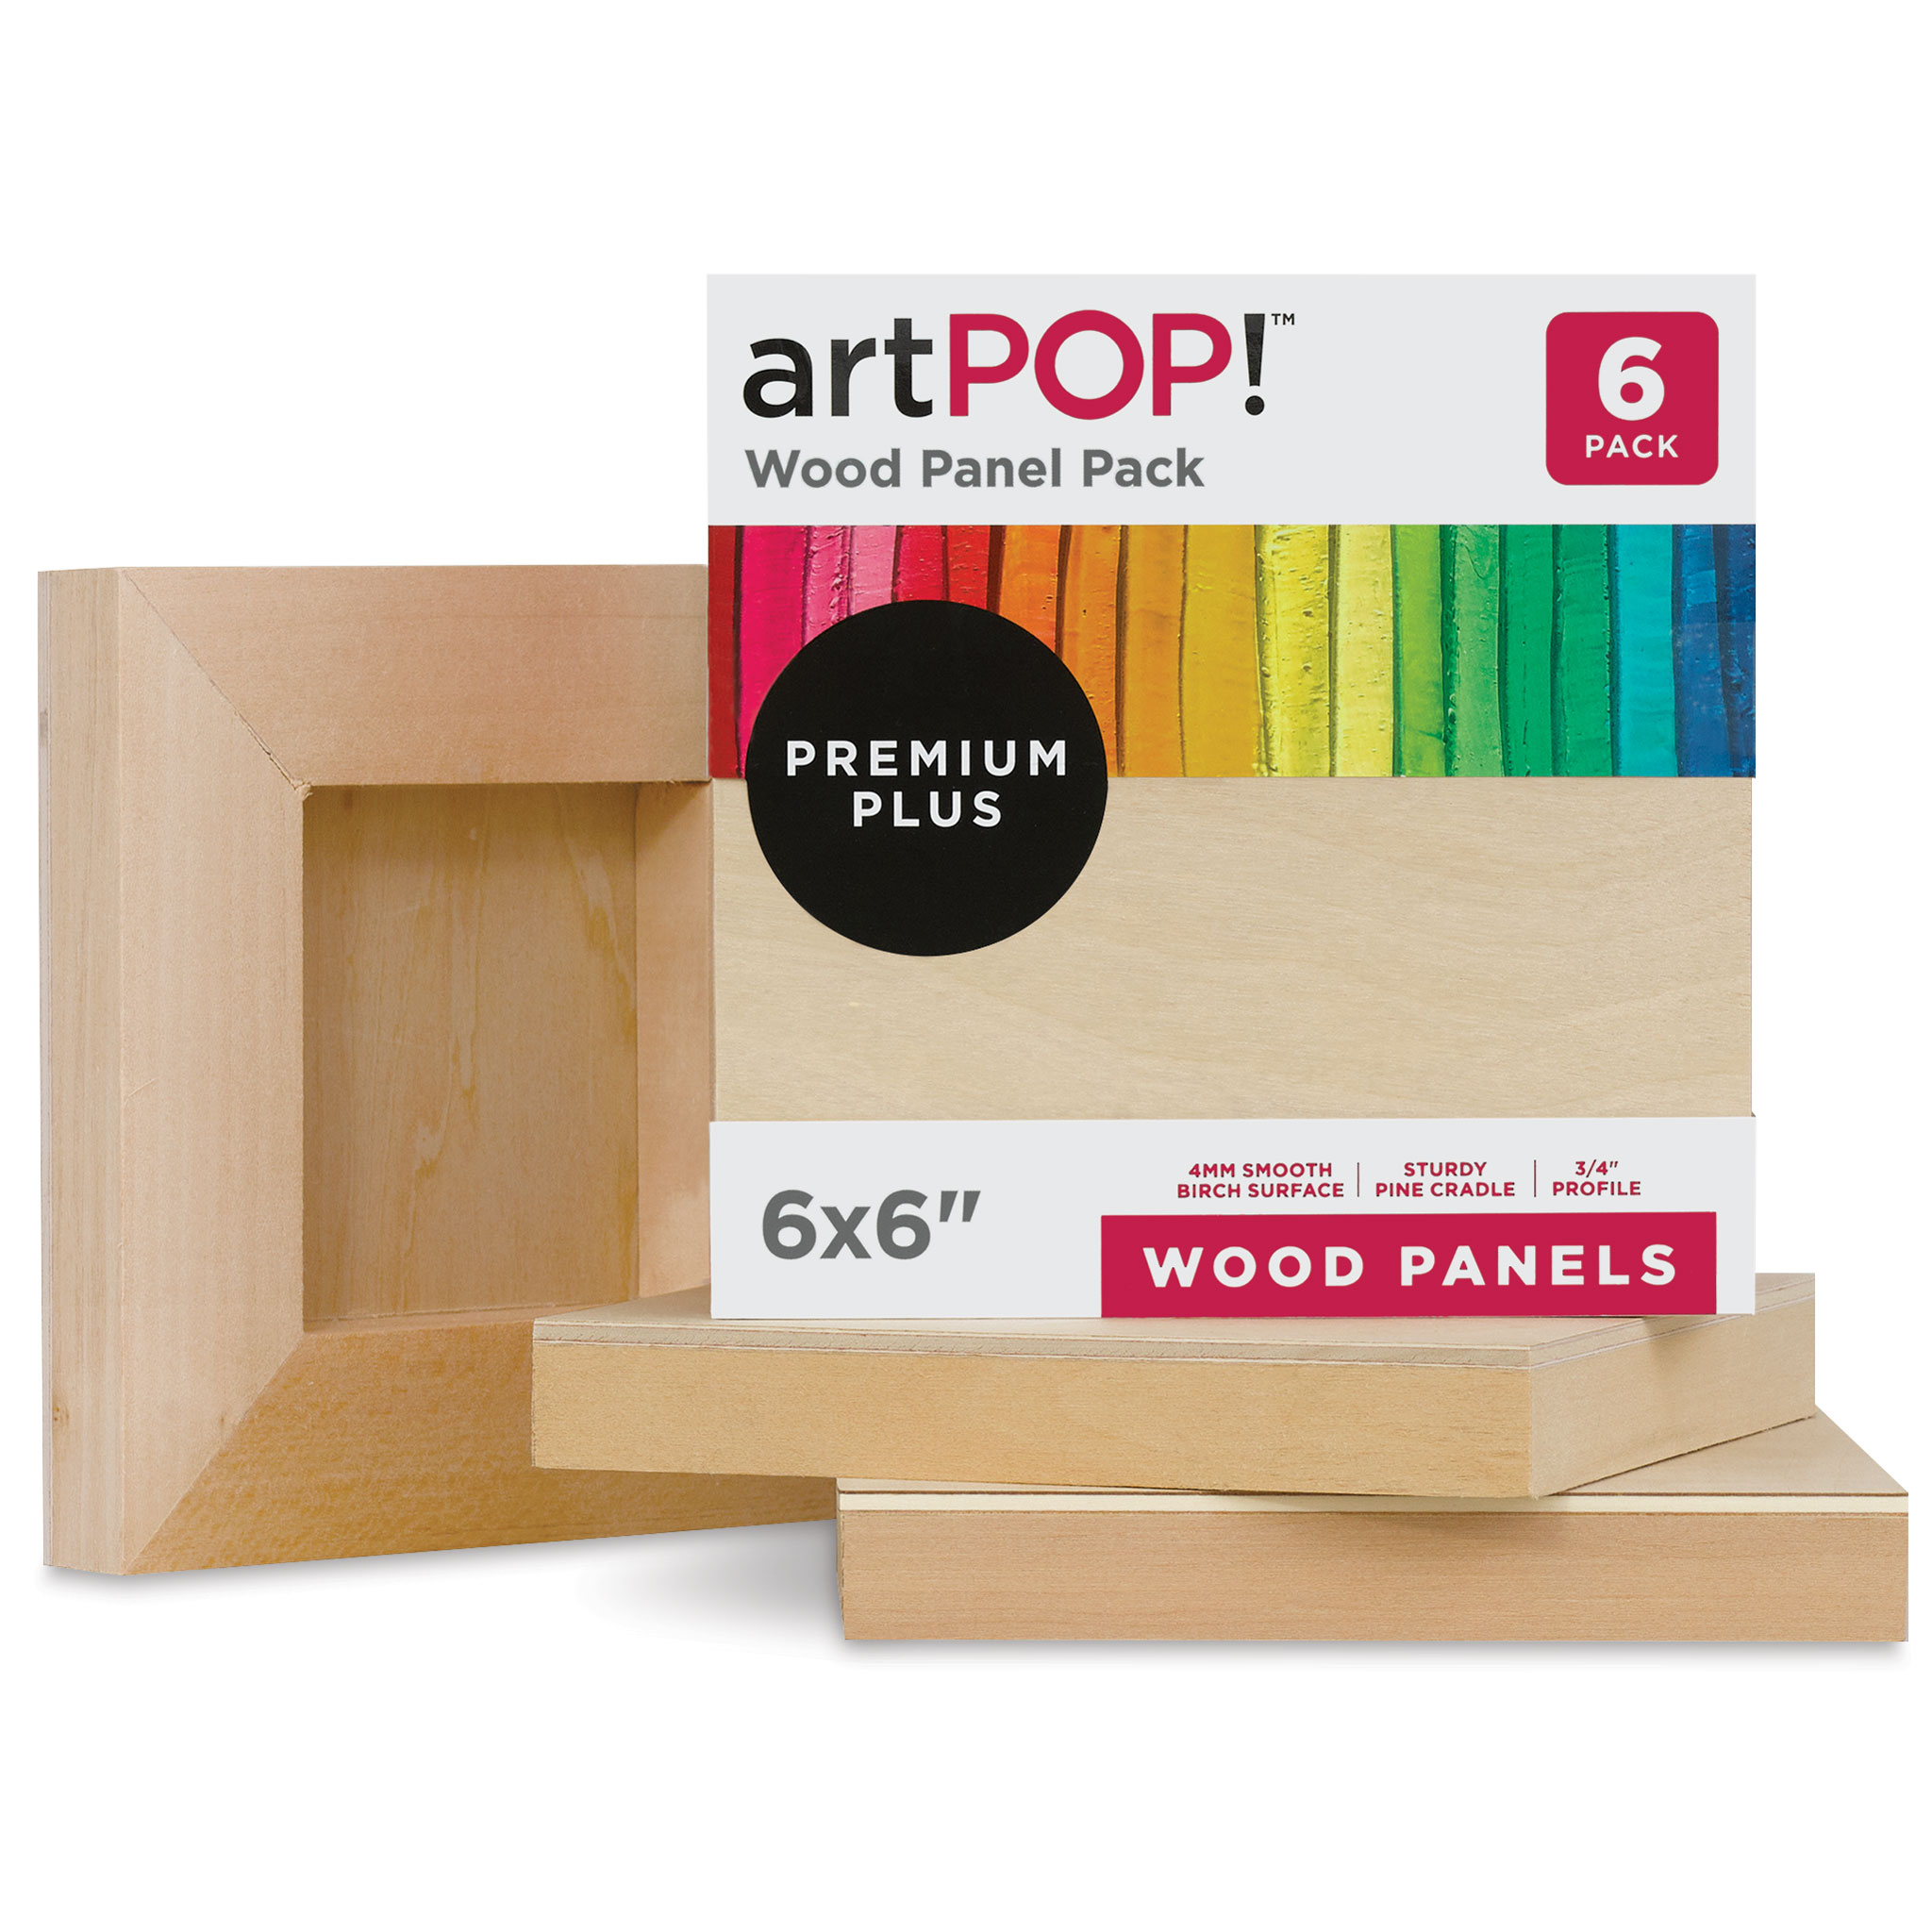 Archival Art Panel with wood cradle made of Natural Maple, all wood  painting support for artist to paint on.